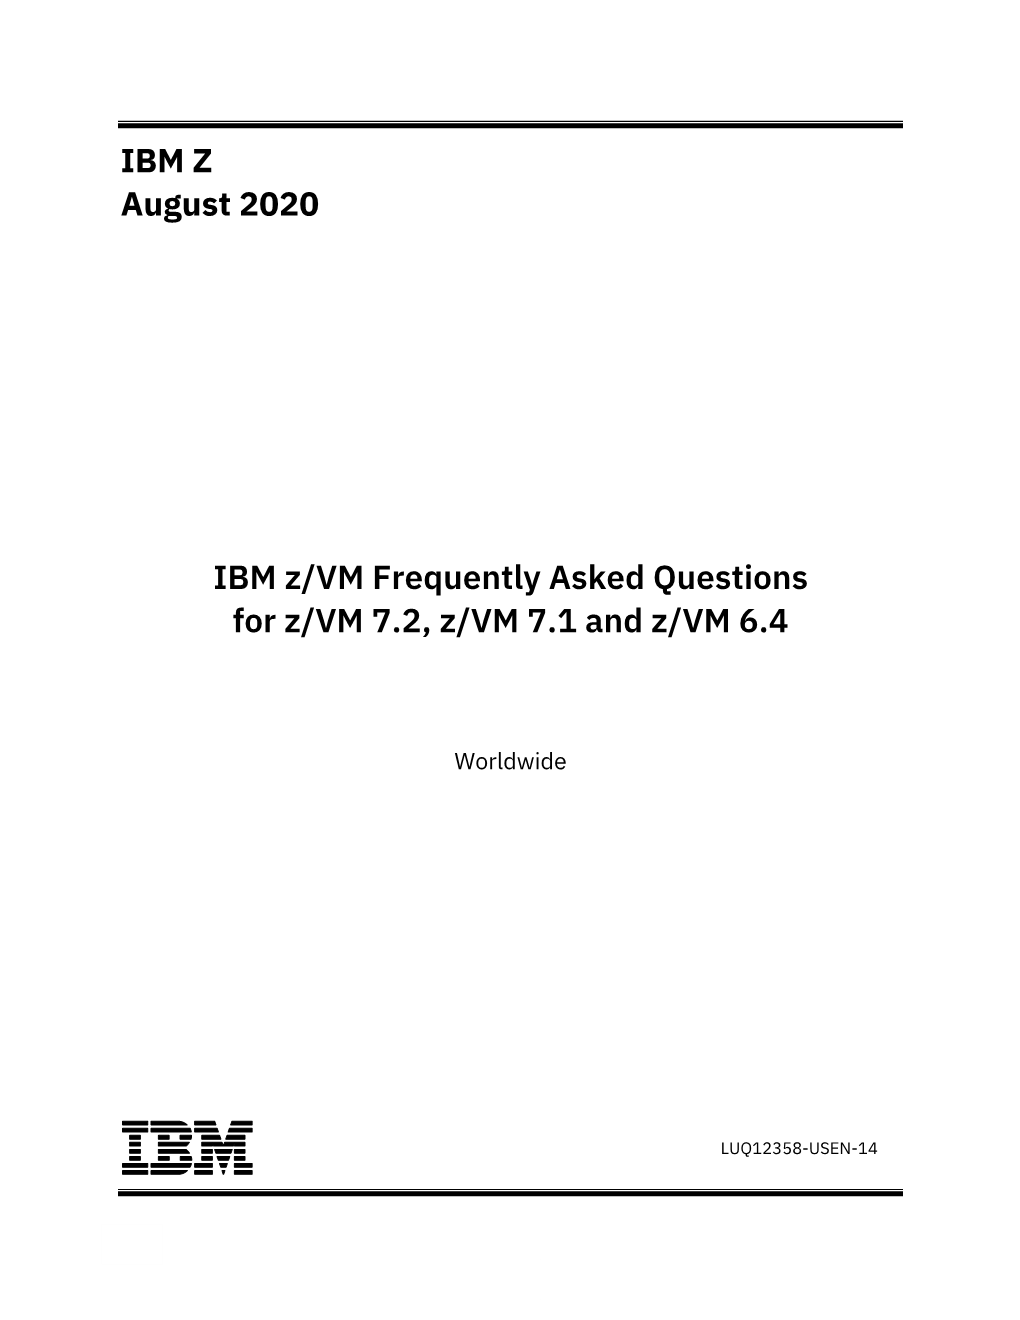 IBM Z/VM – Frequently Asked Questions